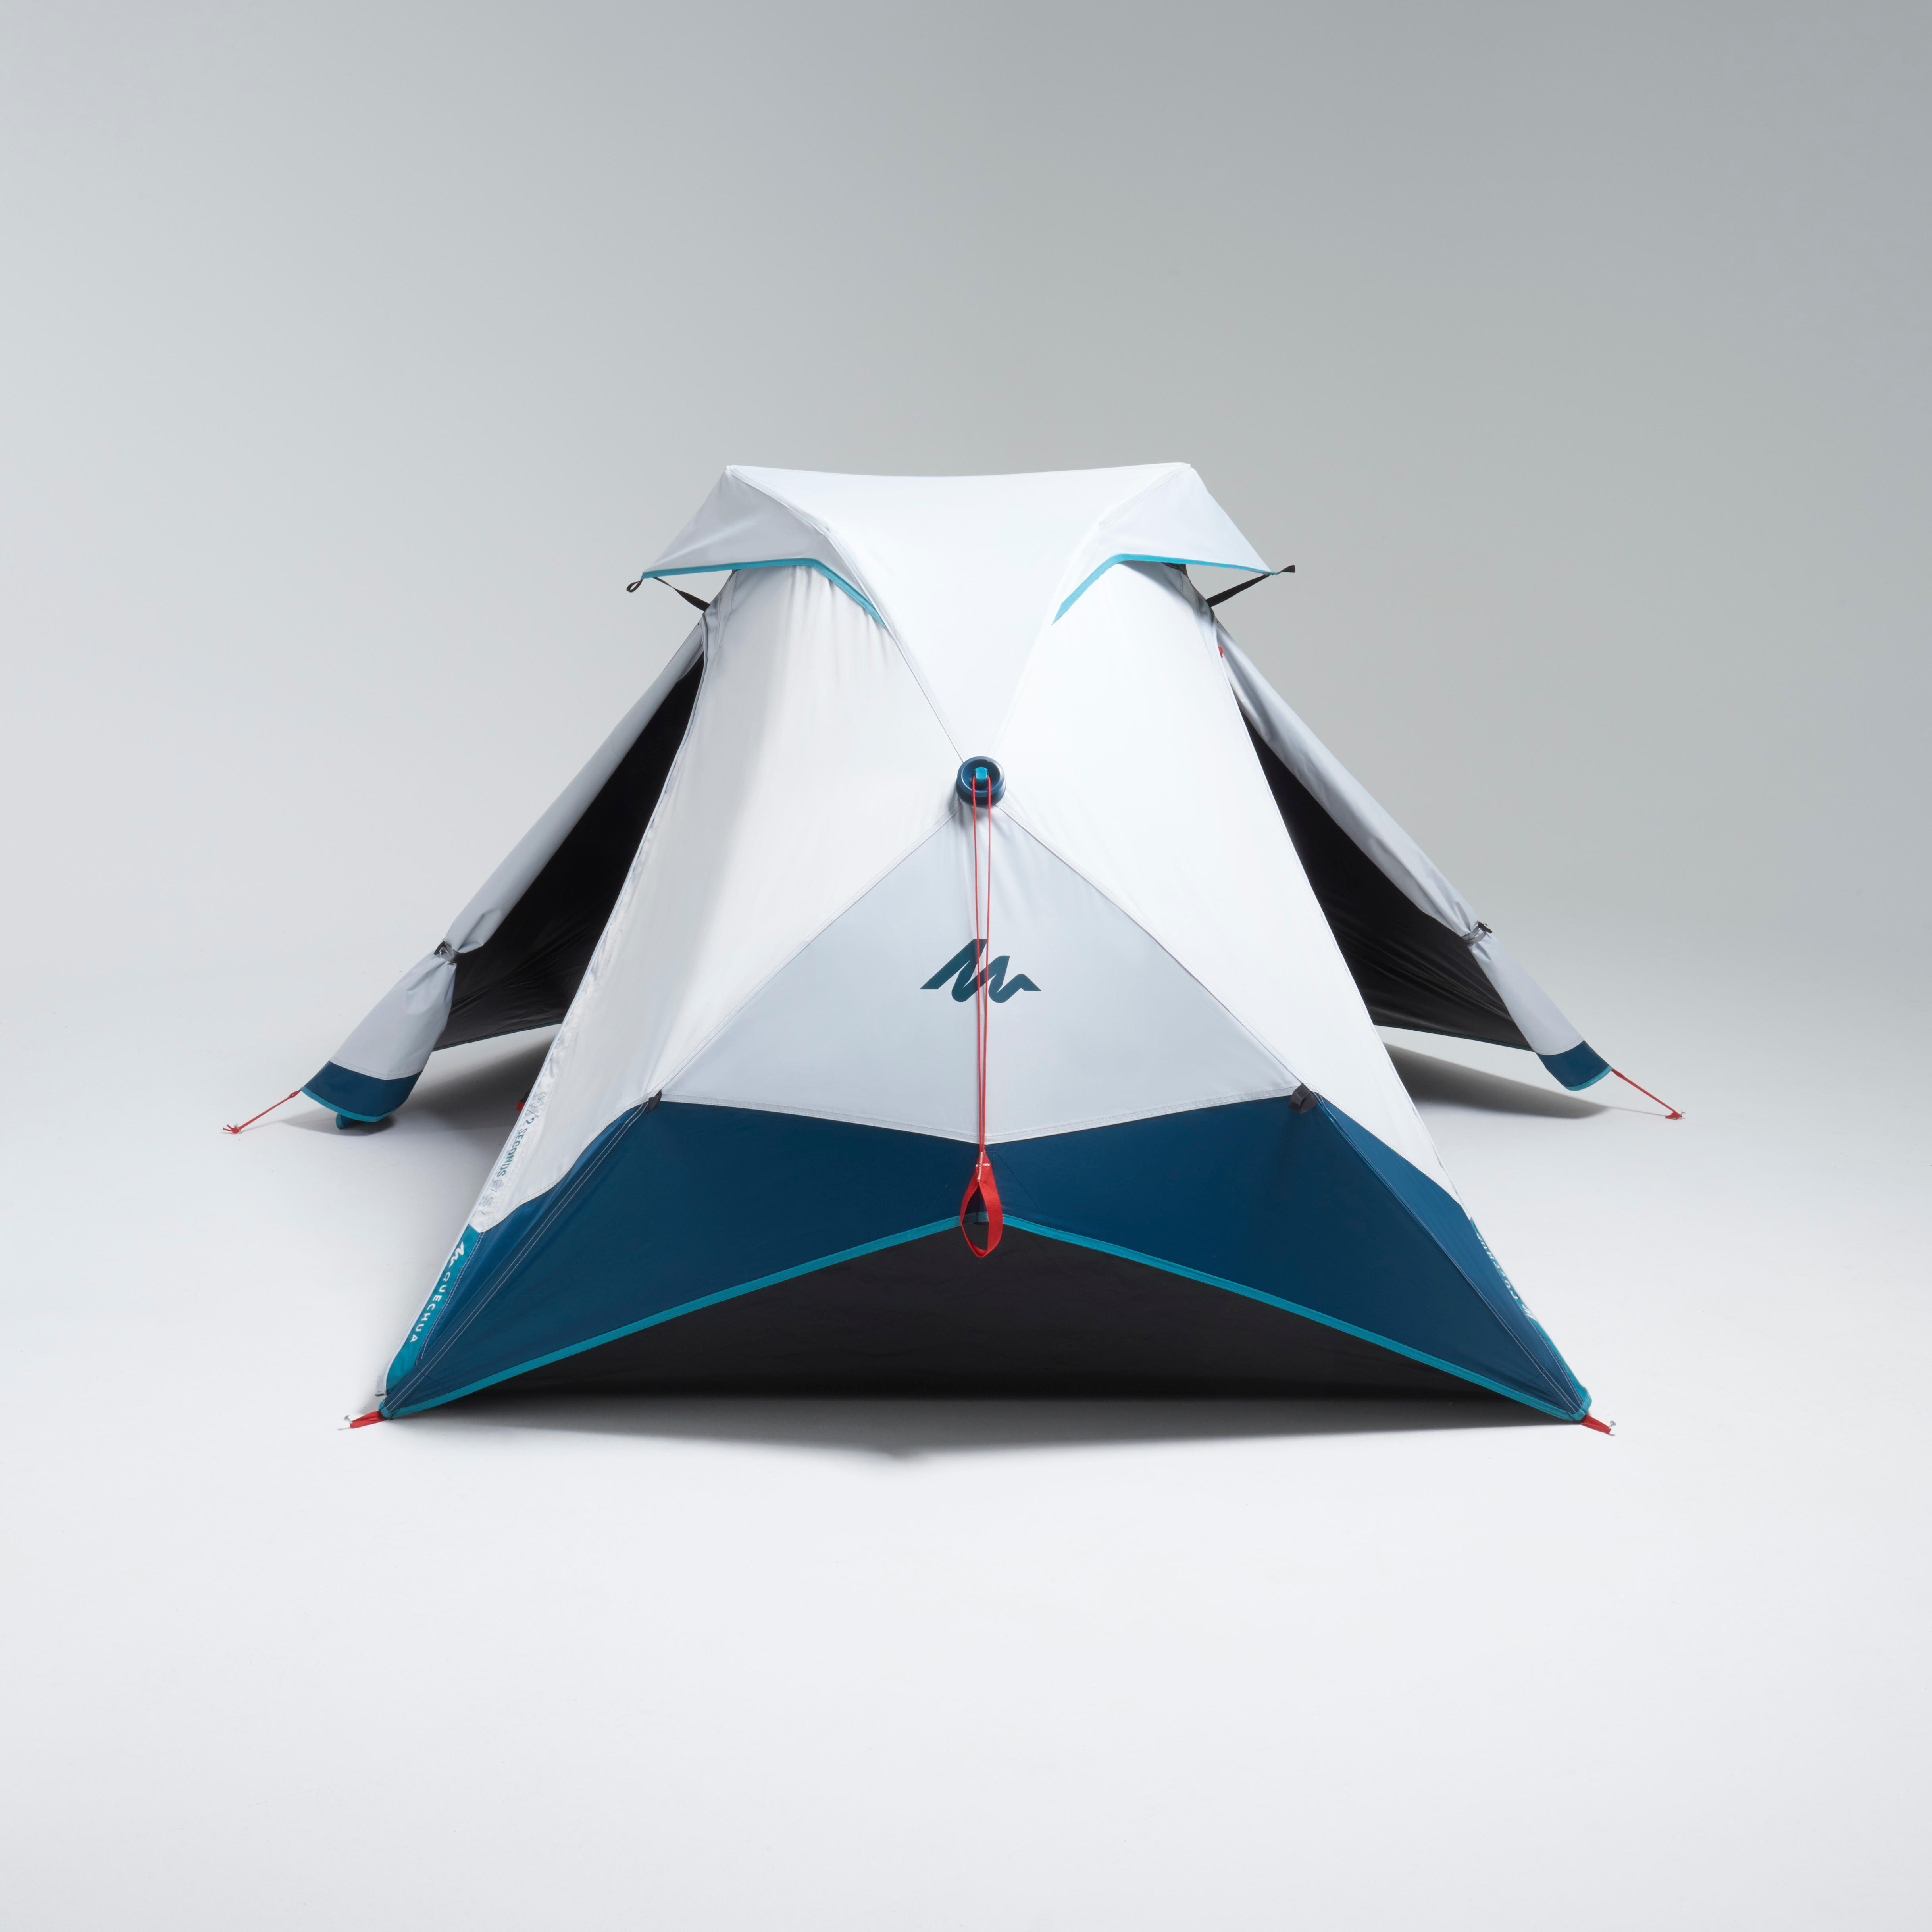 CAMPING TENT 2 SECONDS EASY - FRESH \u0026 